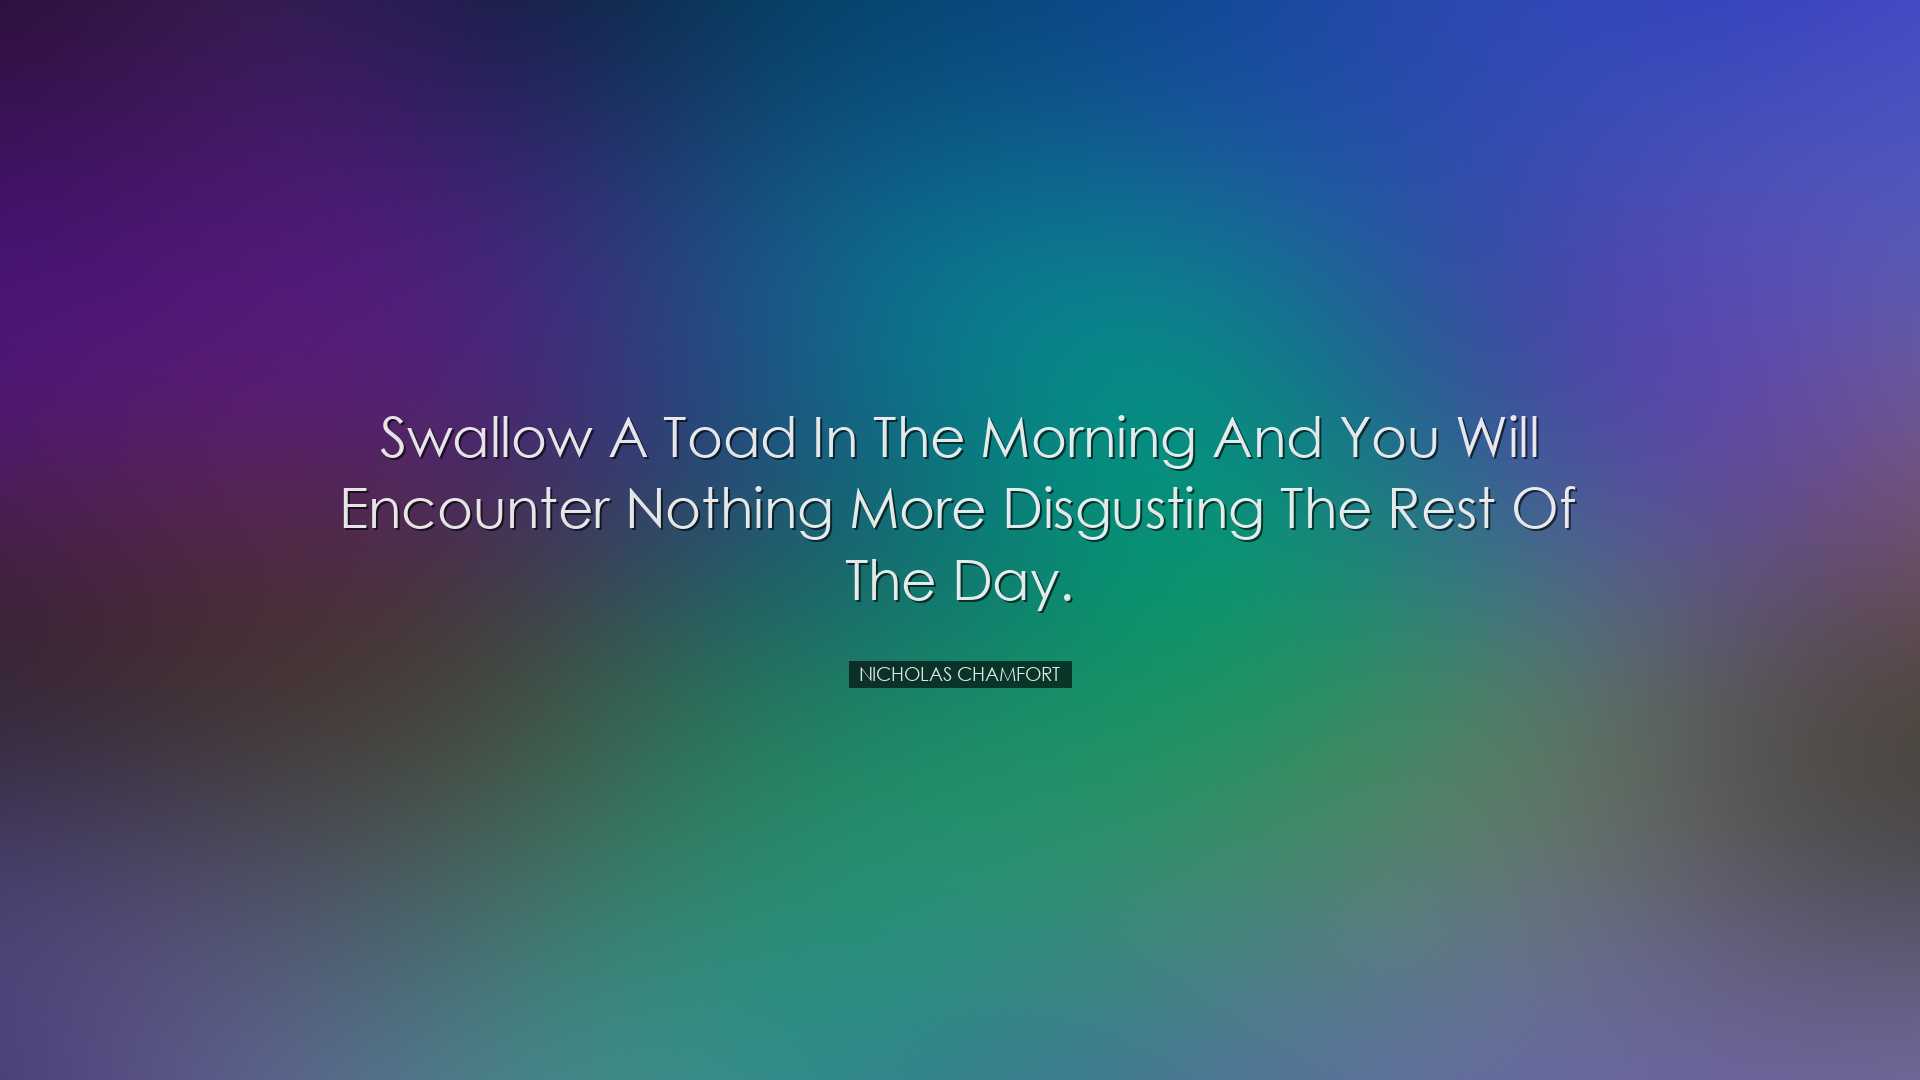 Swallow a toad in the morning and you will encounter nothing more